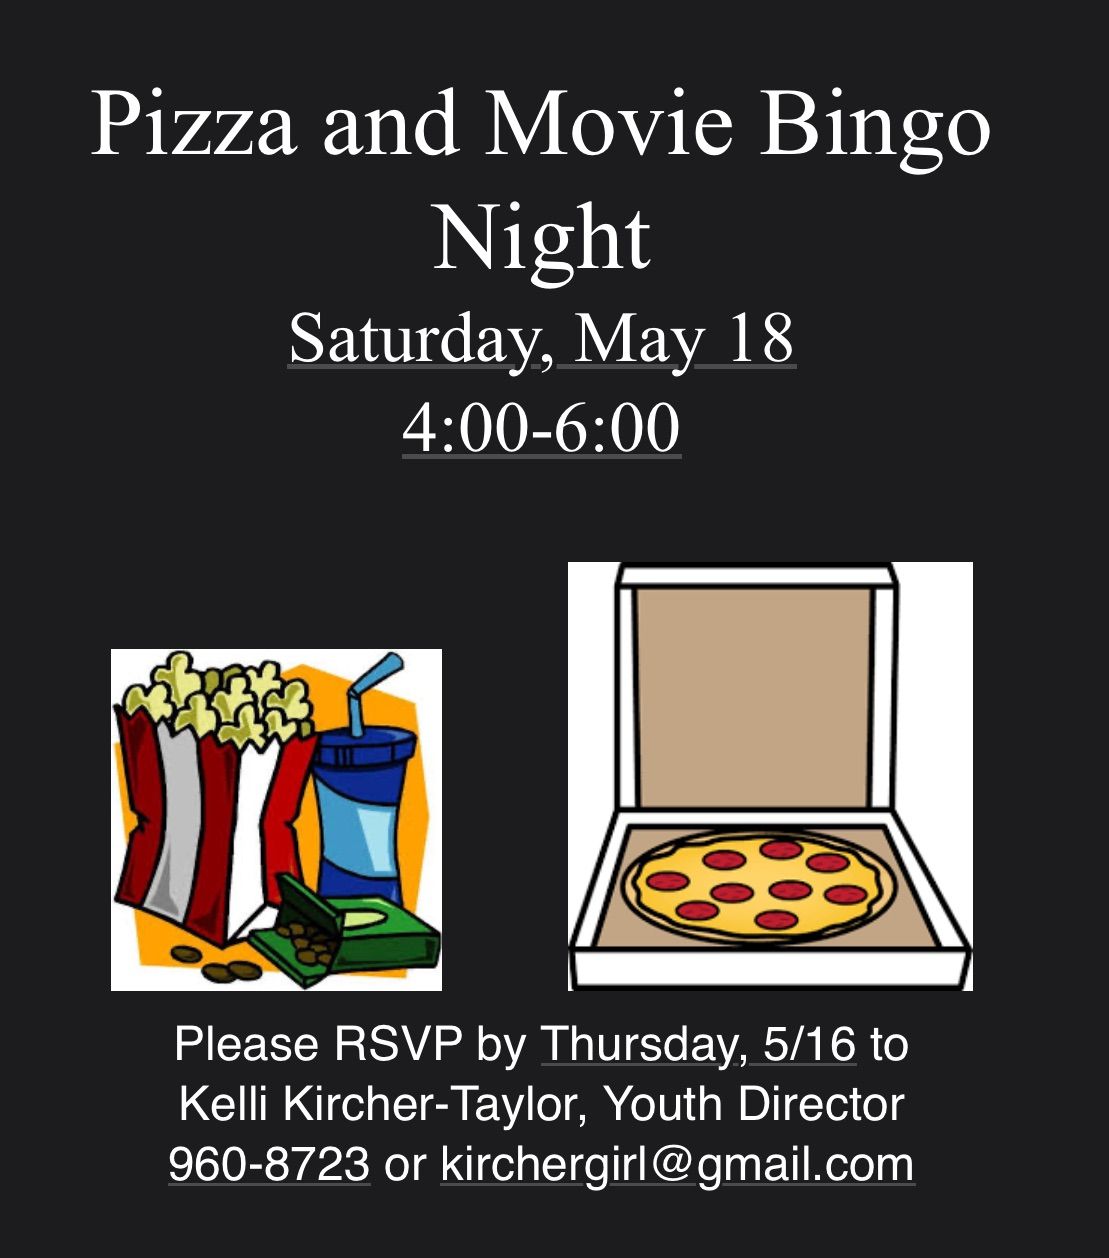 Youth Event - Pizza and Movie Bingo